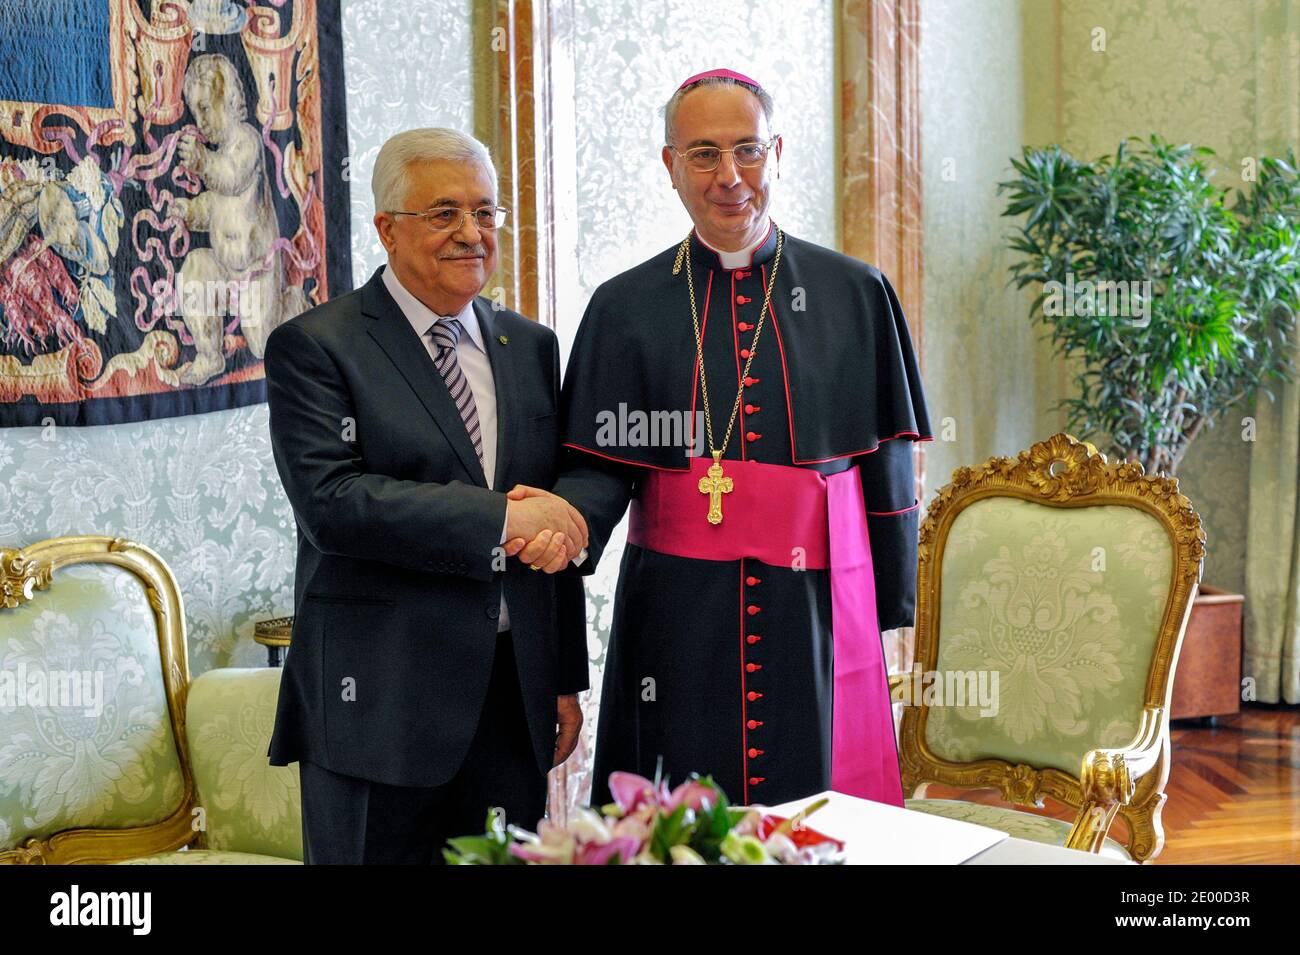 French Archbishop Dominique Mamberti (r) Vatican's secretary for Relations with States met Palestinian President Mahmud Abbas also known as Abu Mazen at the Vatican on October 17, 2013. Photo by ABACAPRESS.COM Stock Photo